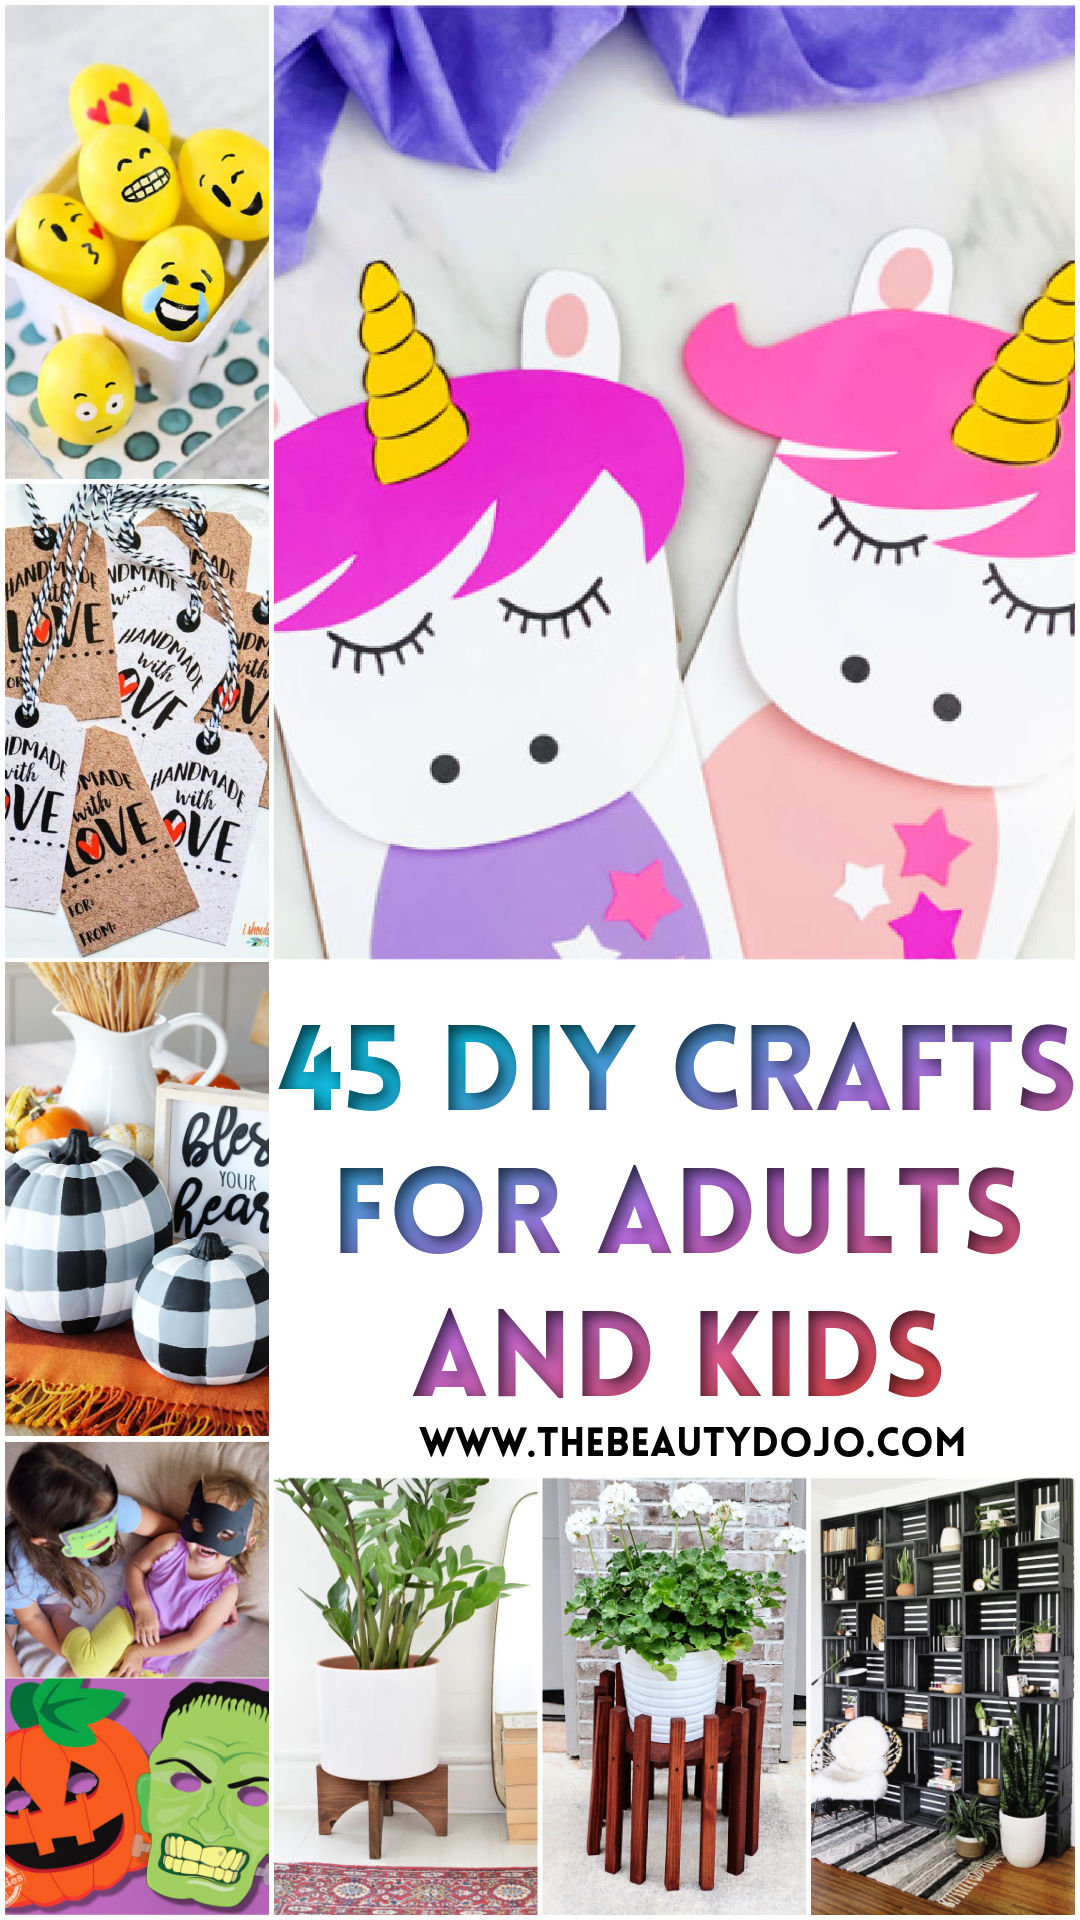 45 DIY Crafts for Adults & Kids - Easy Crafts to Do at Home